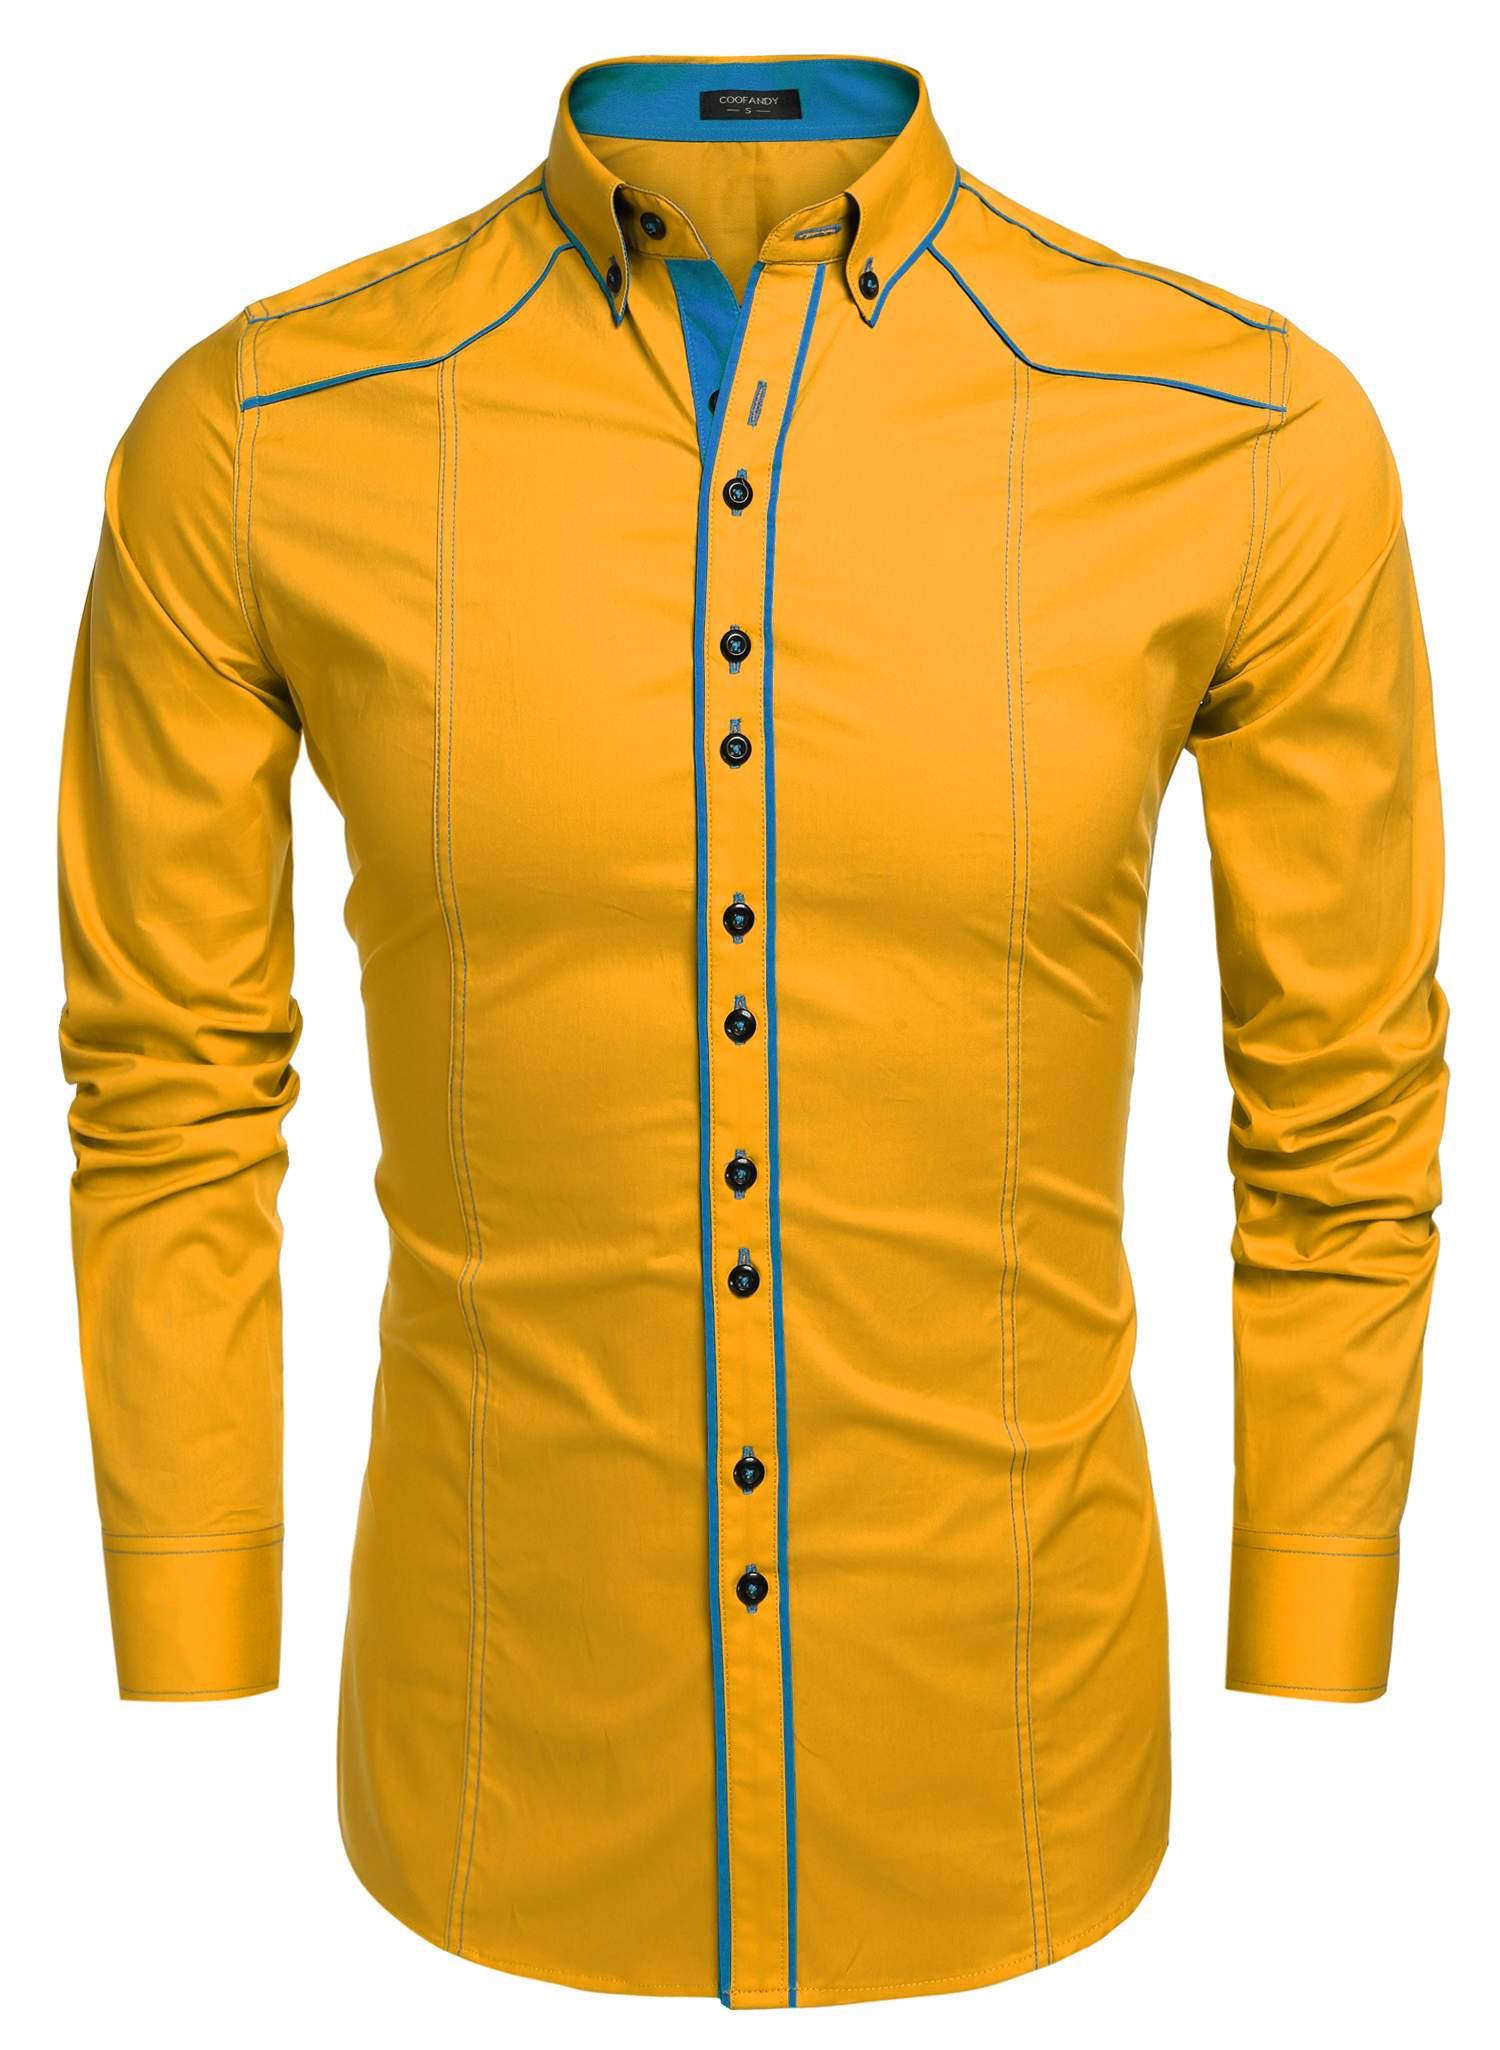 Top 10 Fashionable Yellow Shirts for Men and Women | Styles At Life